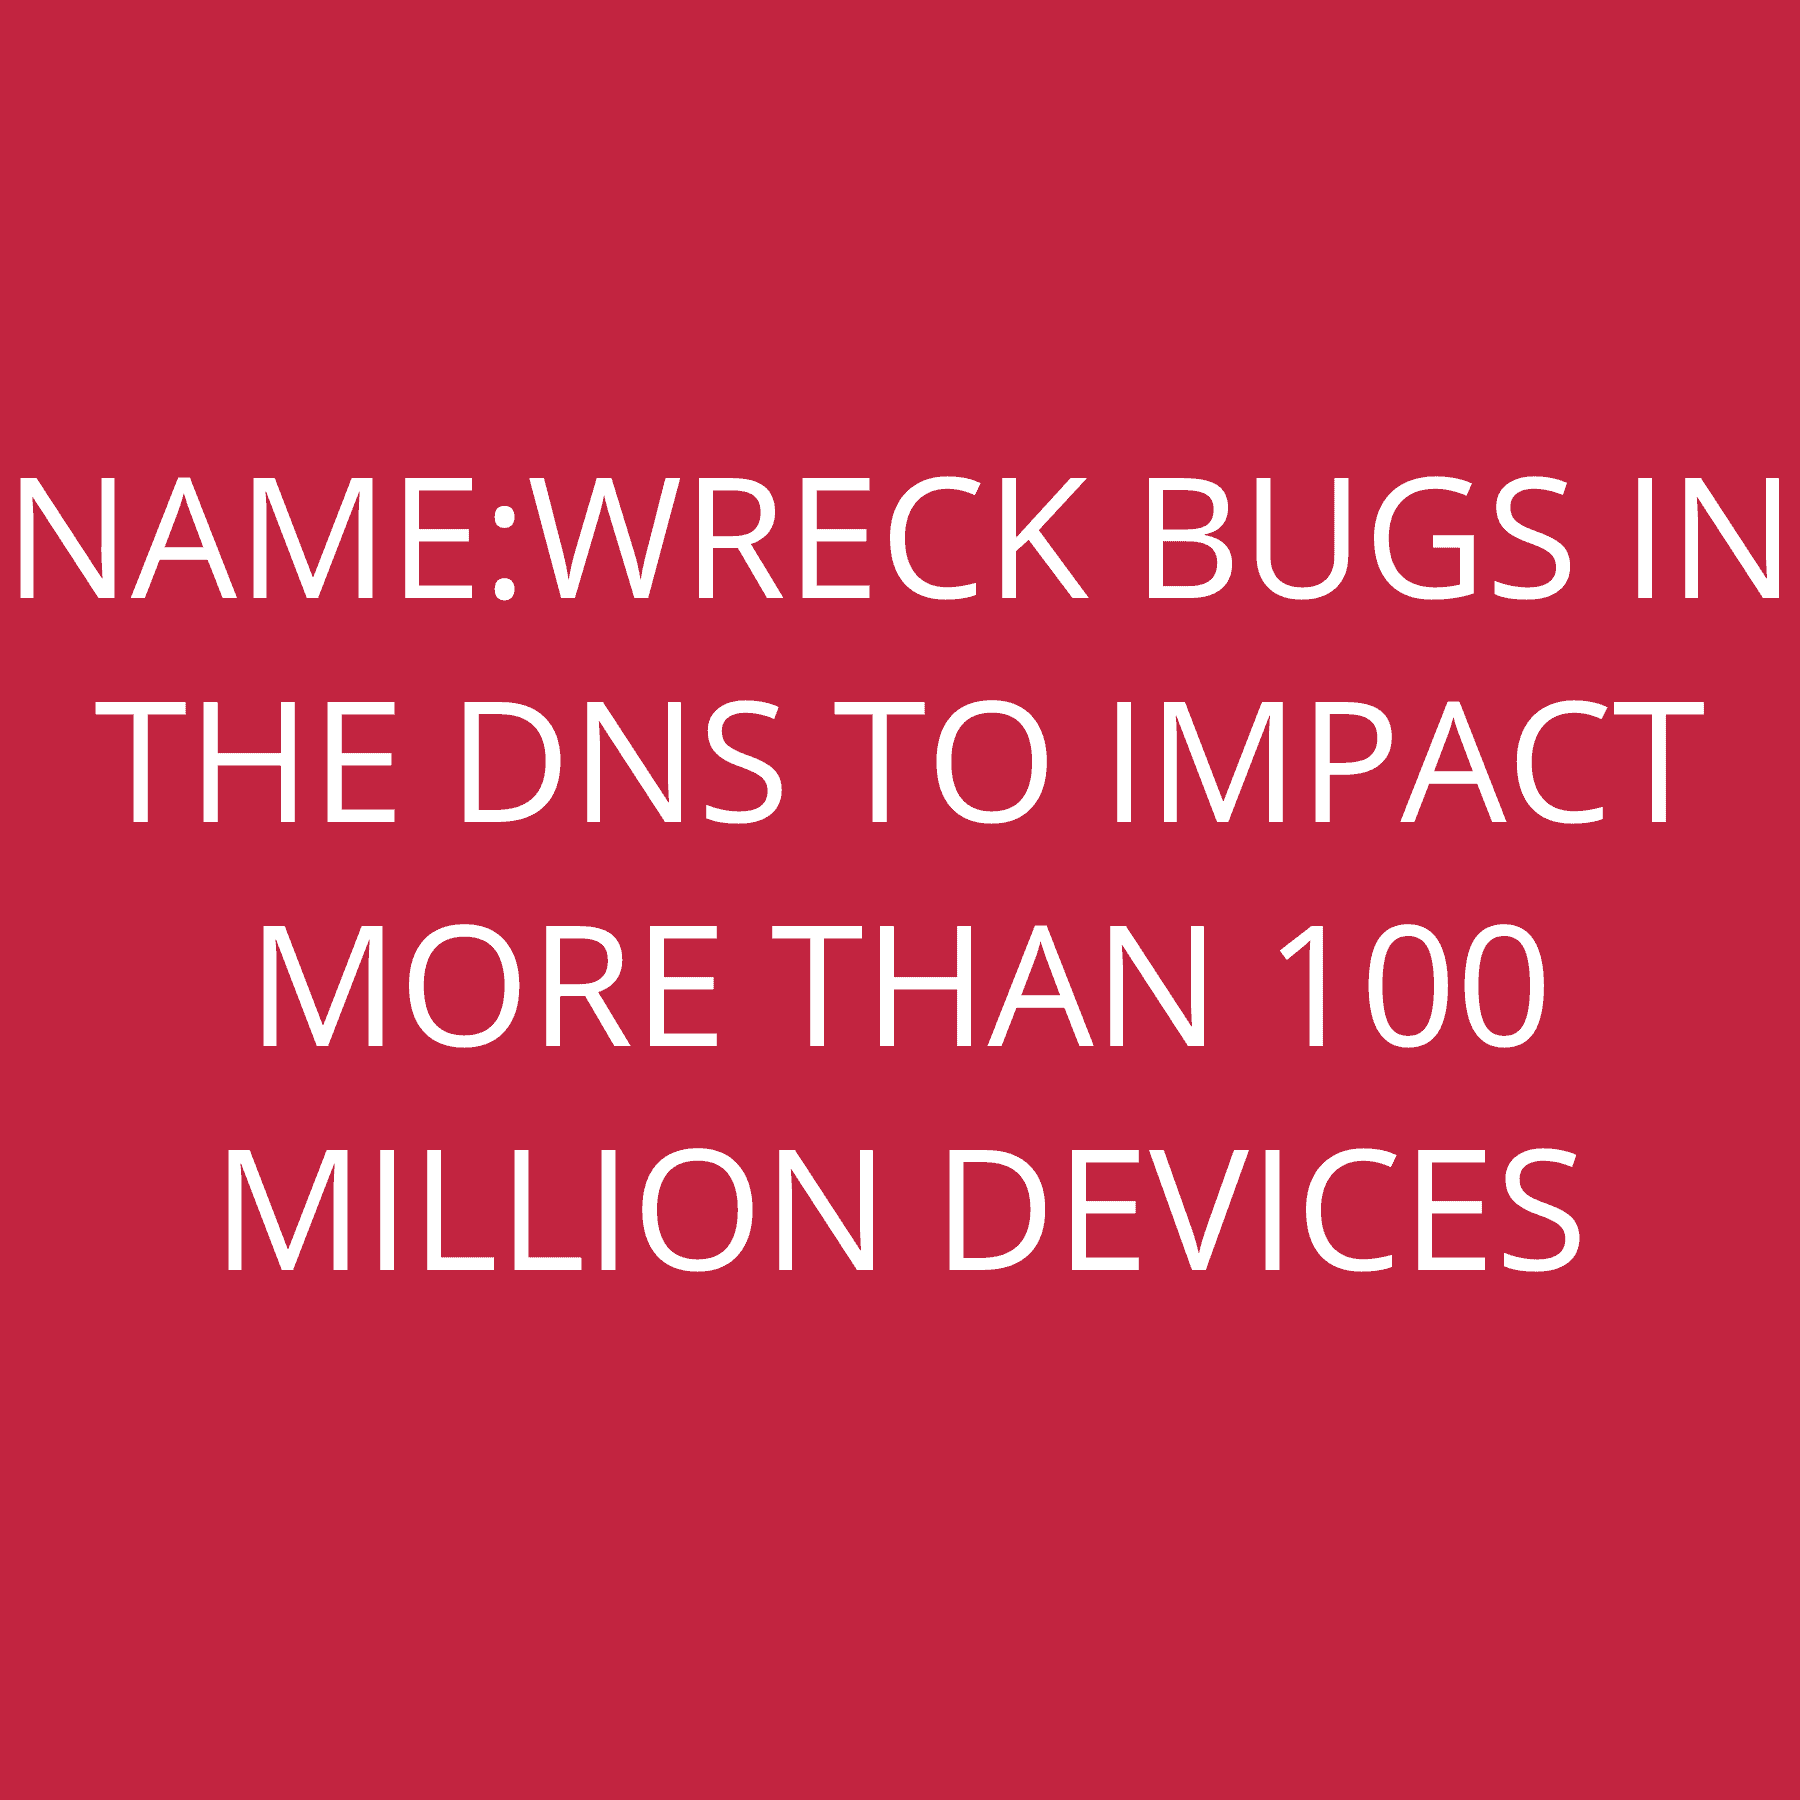 NAME:WRECK bugs in the DNS to impact more than 100 Million devices